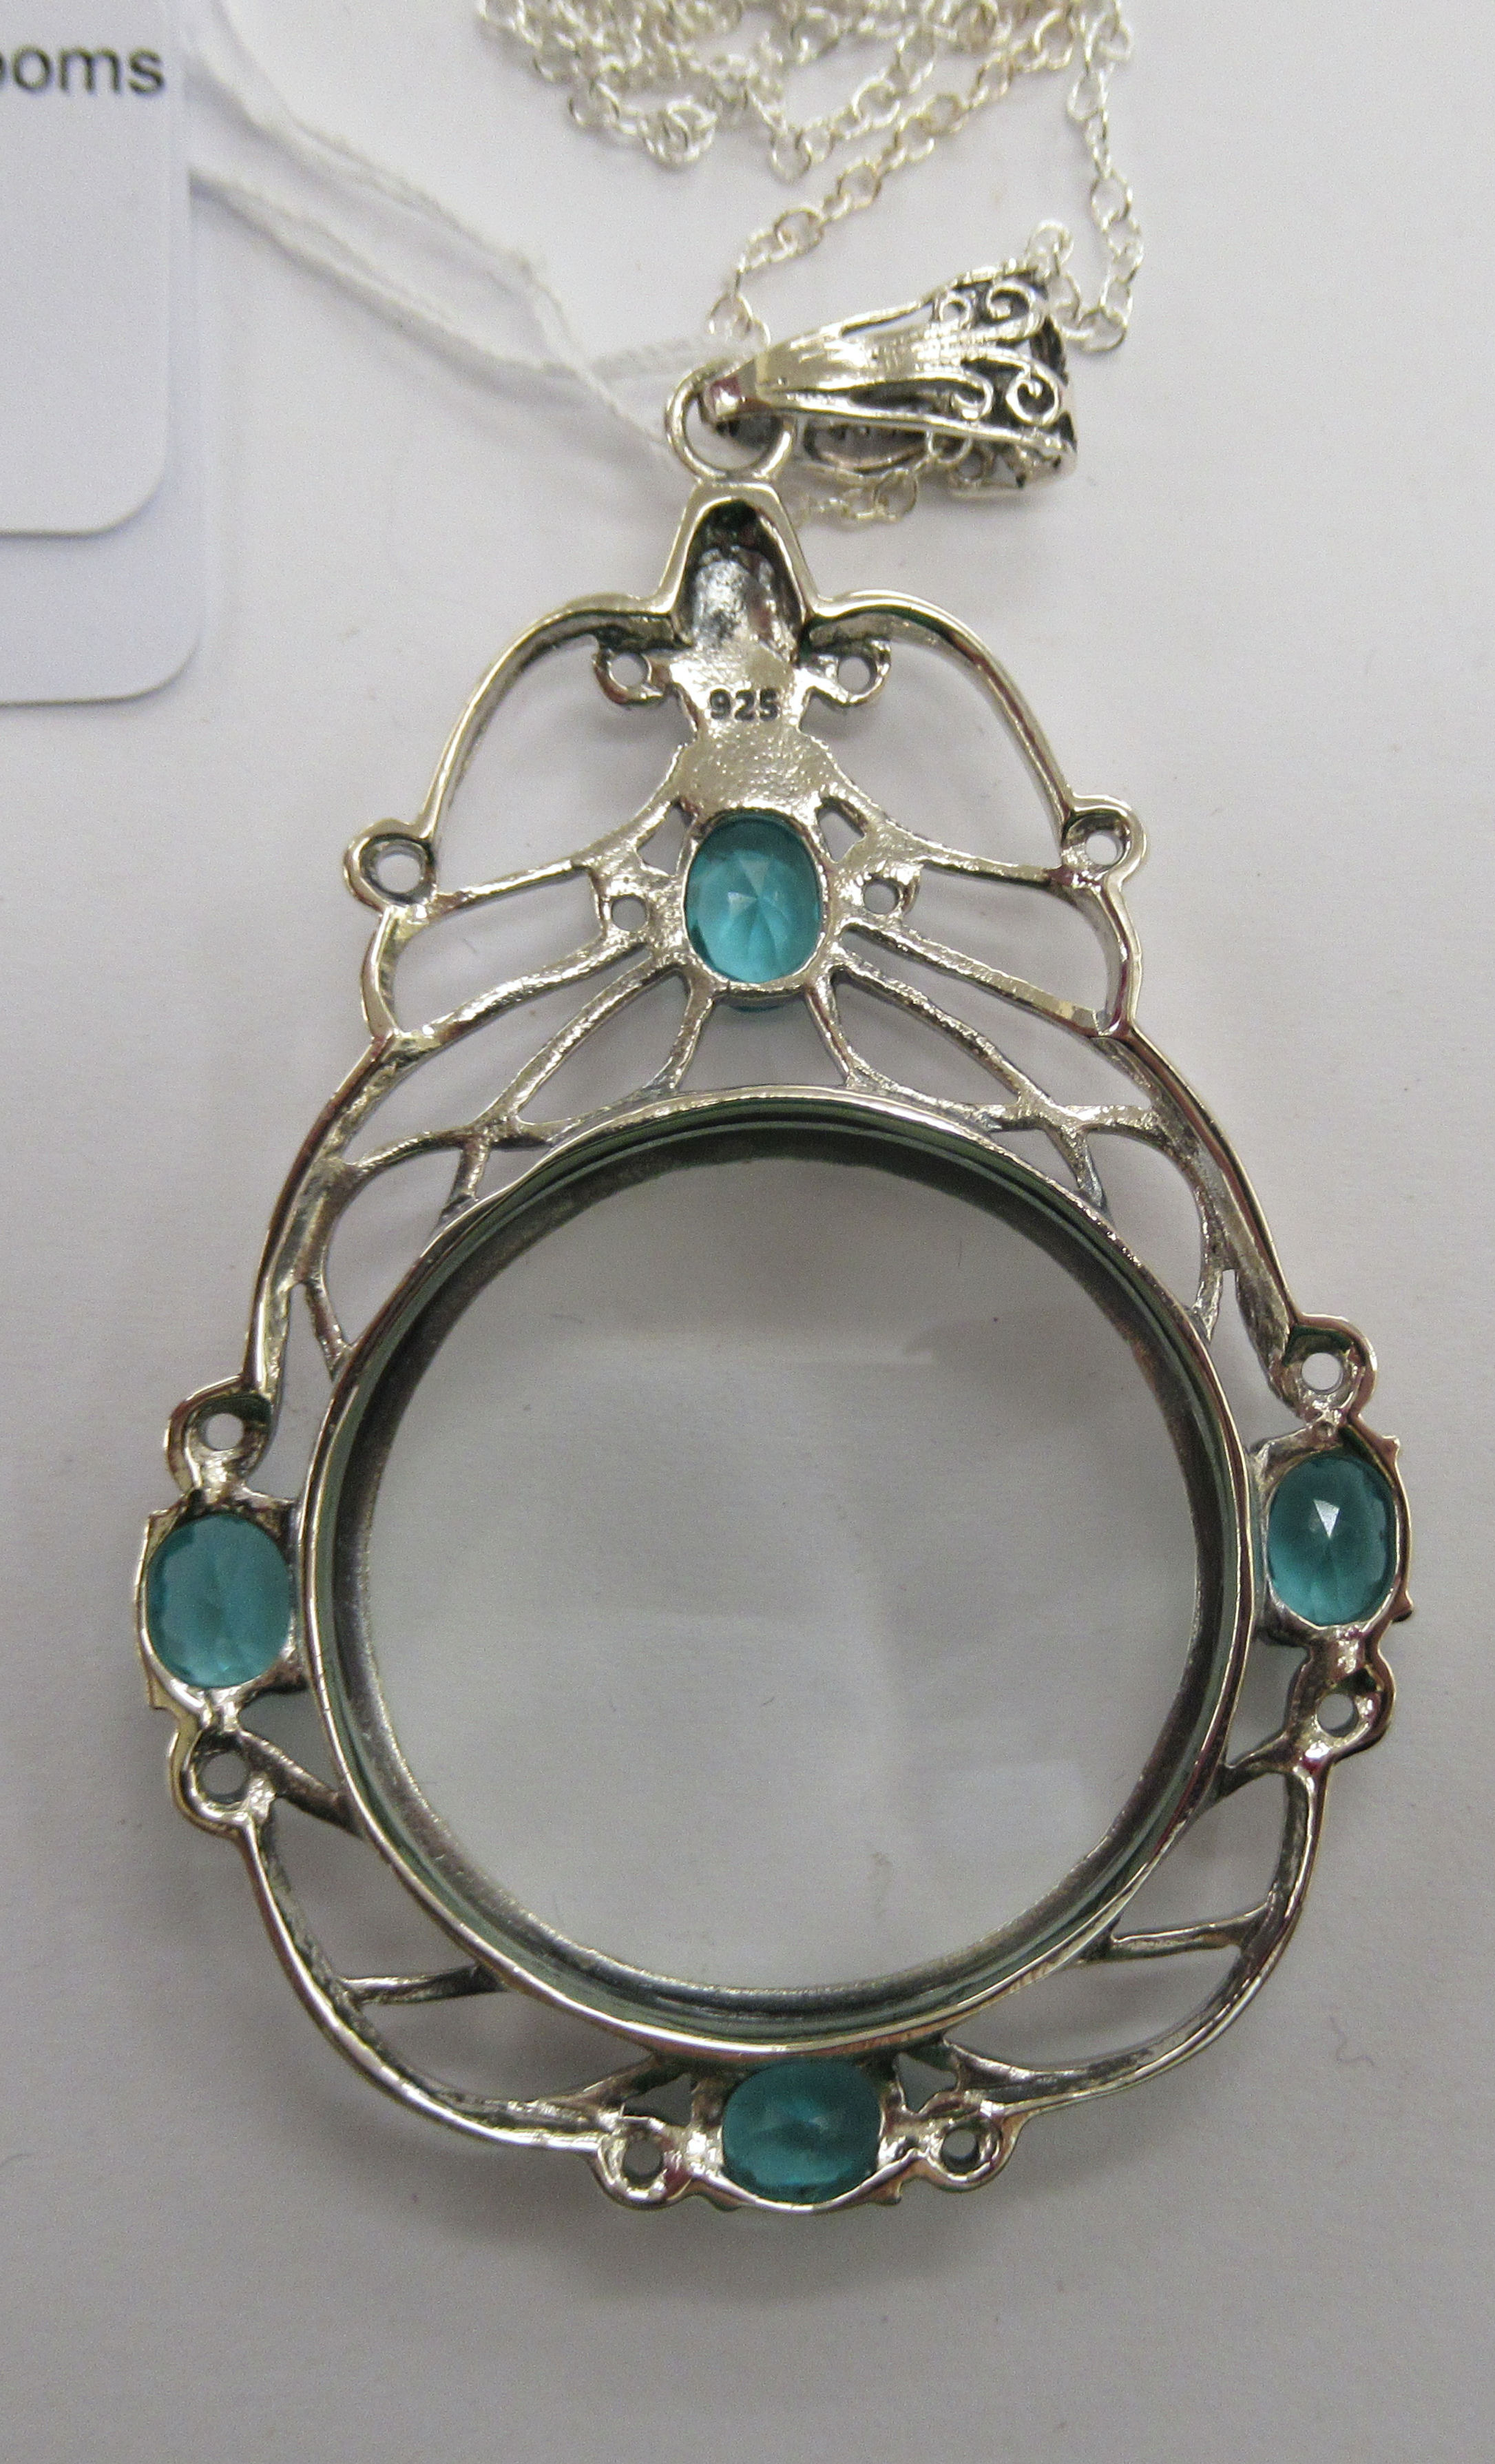 A silver framed magnifying glass pendant, set with blue topaz, - Image 2 of 2